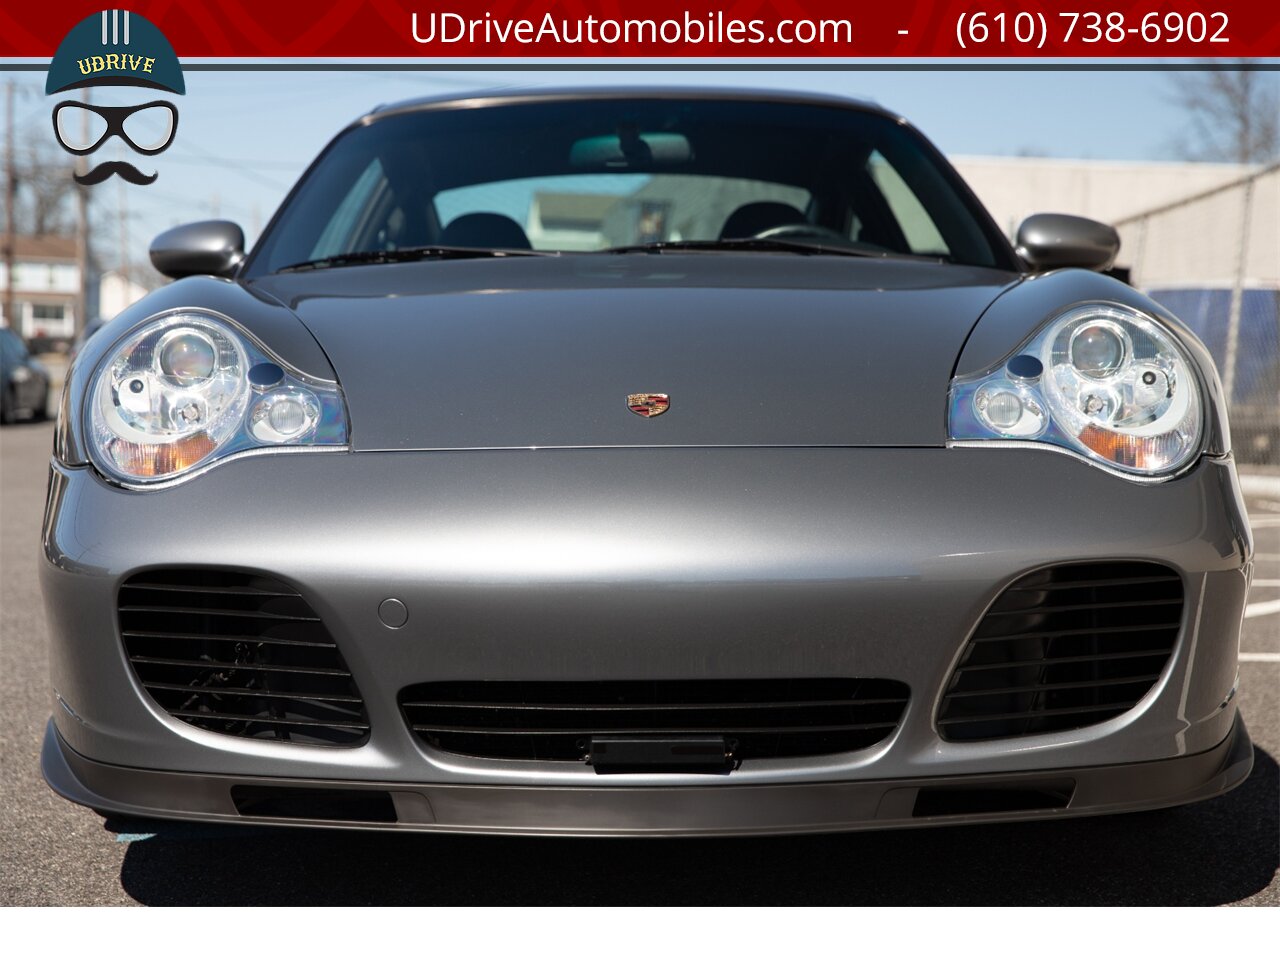 2003 Porsche 911 996 Turbo X50 Power Kit 6 Speed Seal Grey  over Black Leather - Photo 13 - West Chester, PA 19382